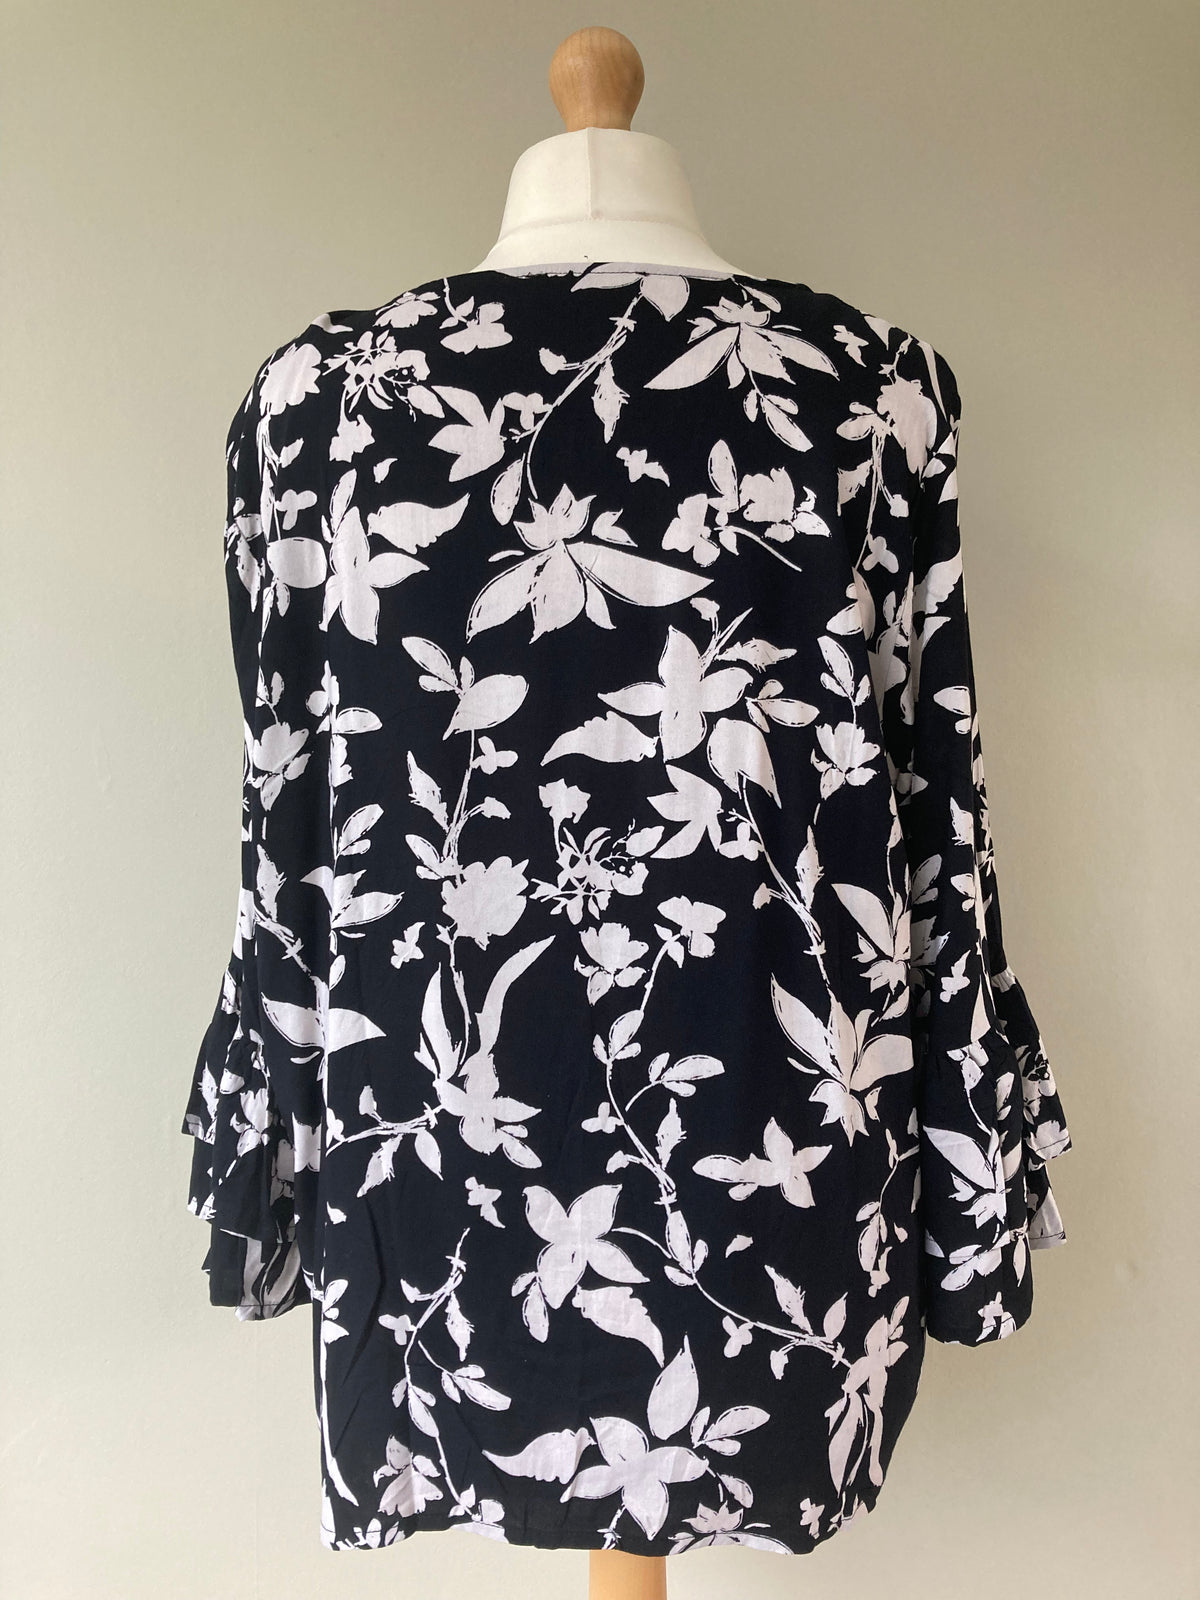 Three quarter printed blouse by CREATION L - Size 20/22